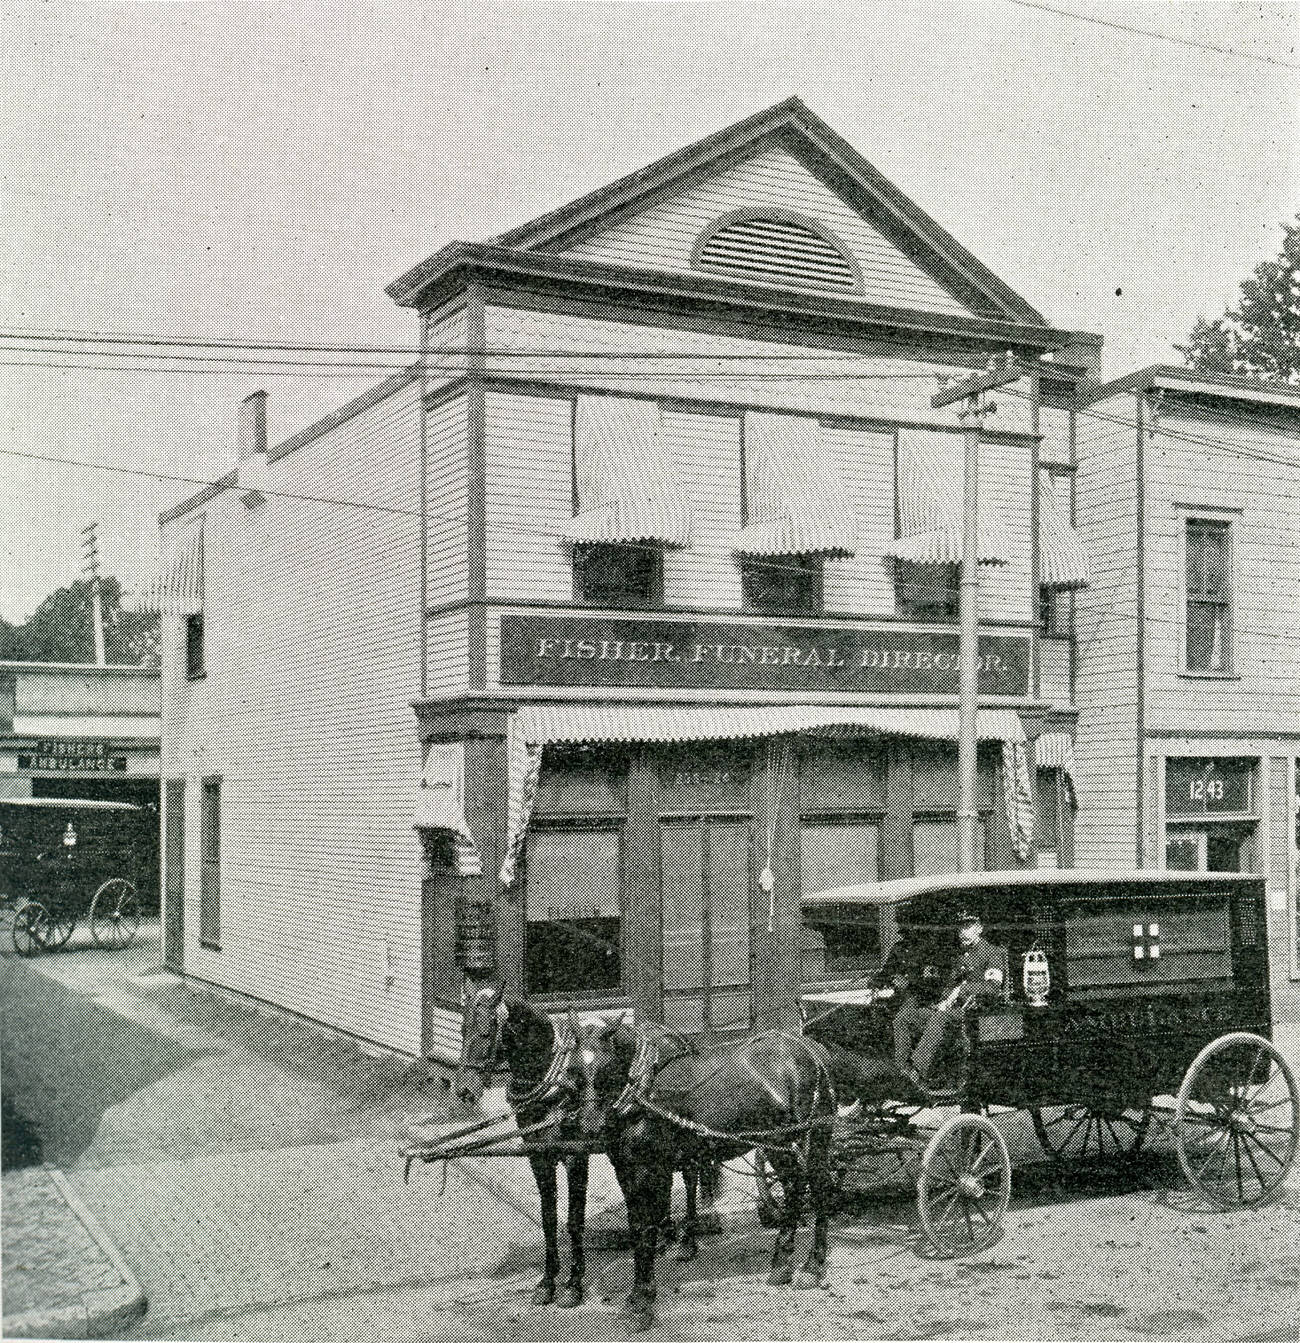 Edward F. Fisher & Company, funeral directors and ambulance service, established 1870, out of business 1961. Circa 1901.